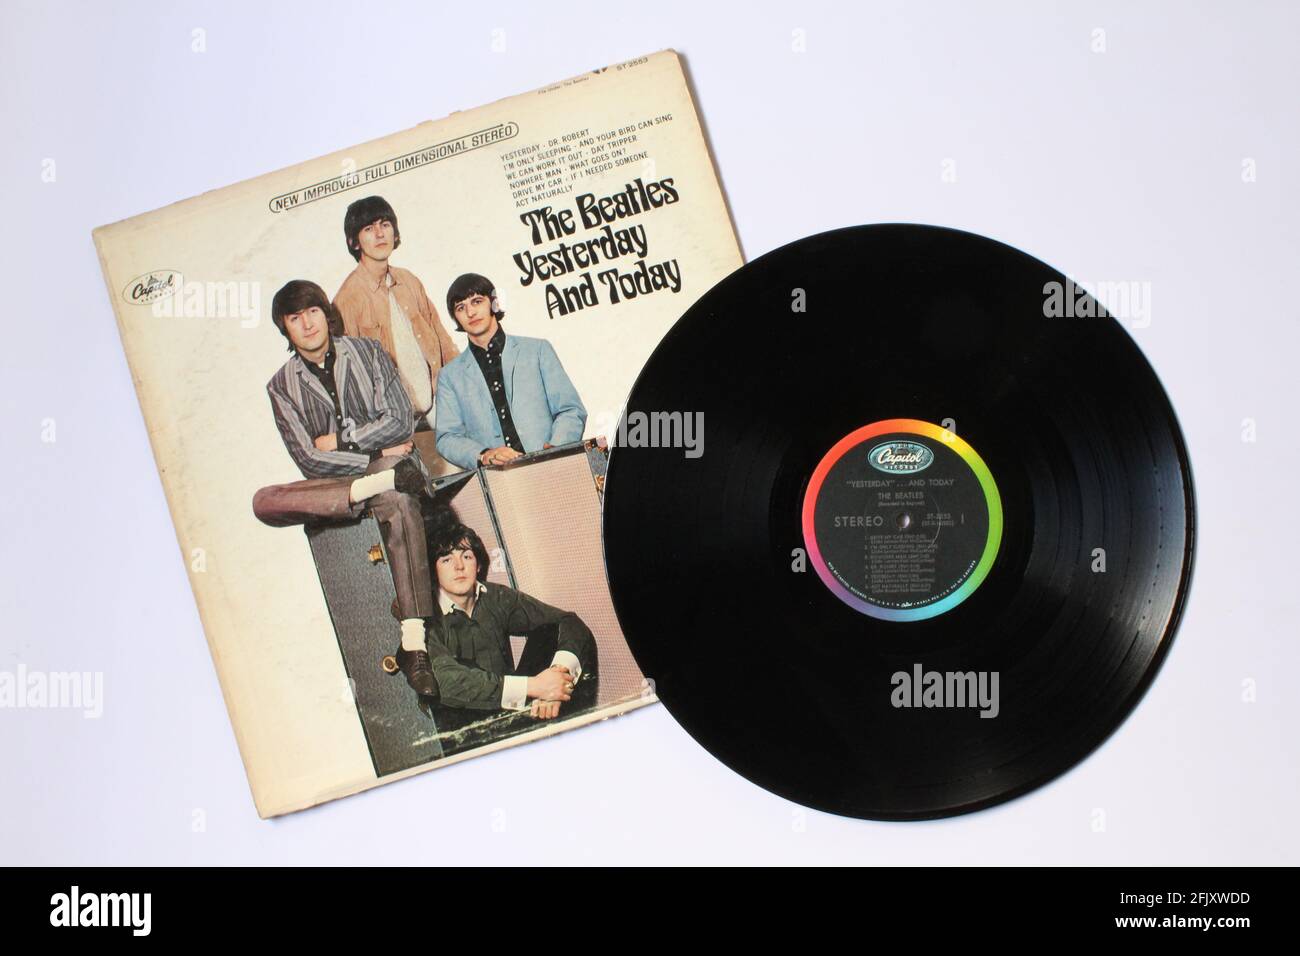 English rock band The Beatles music album on vinyl record LP disc. Titled: Yesterday and Today Stock Photo